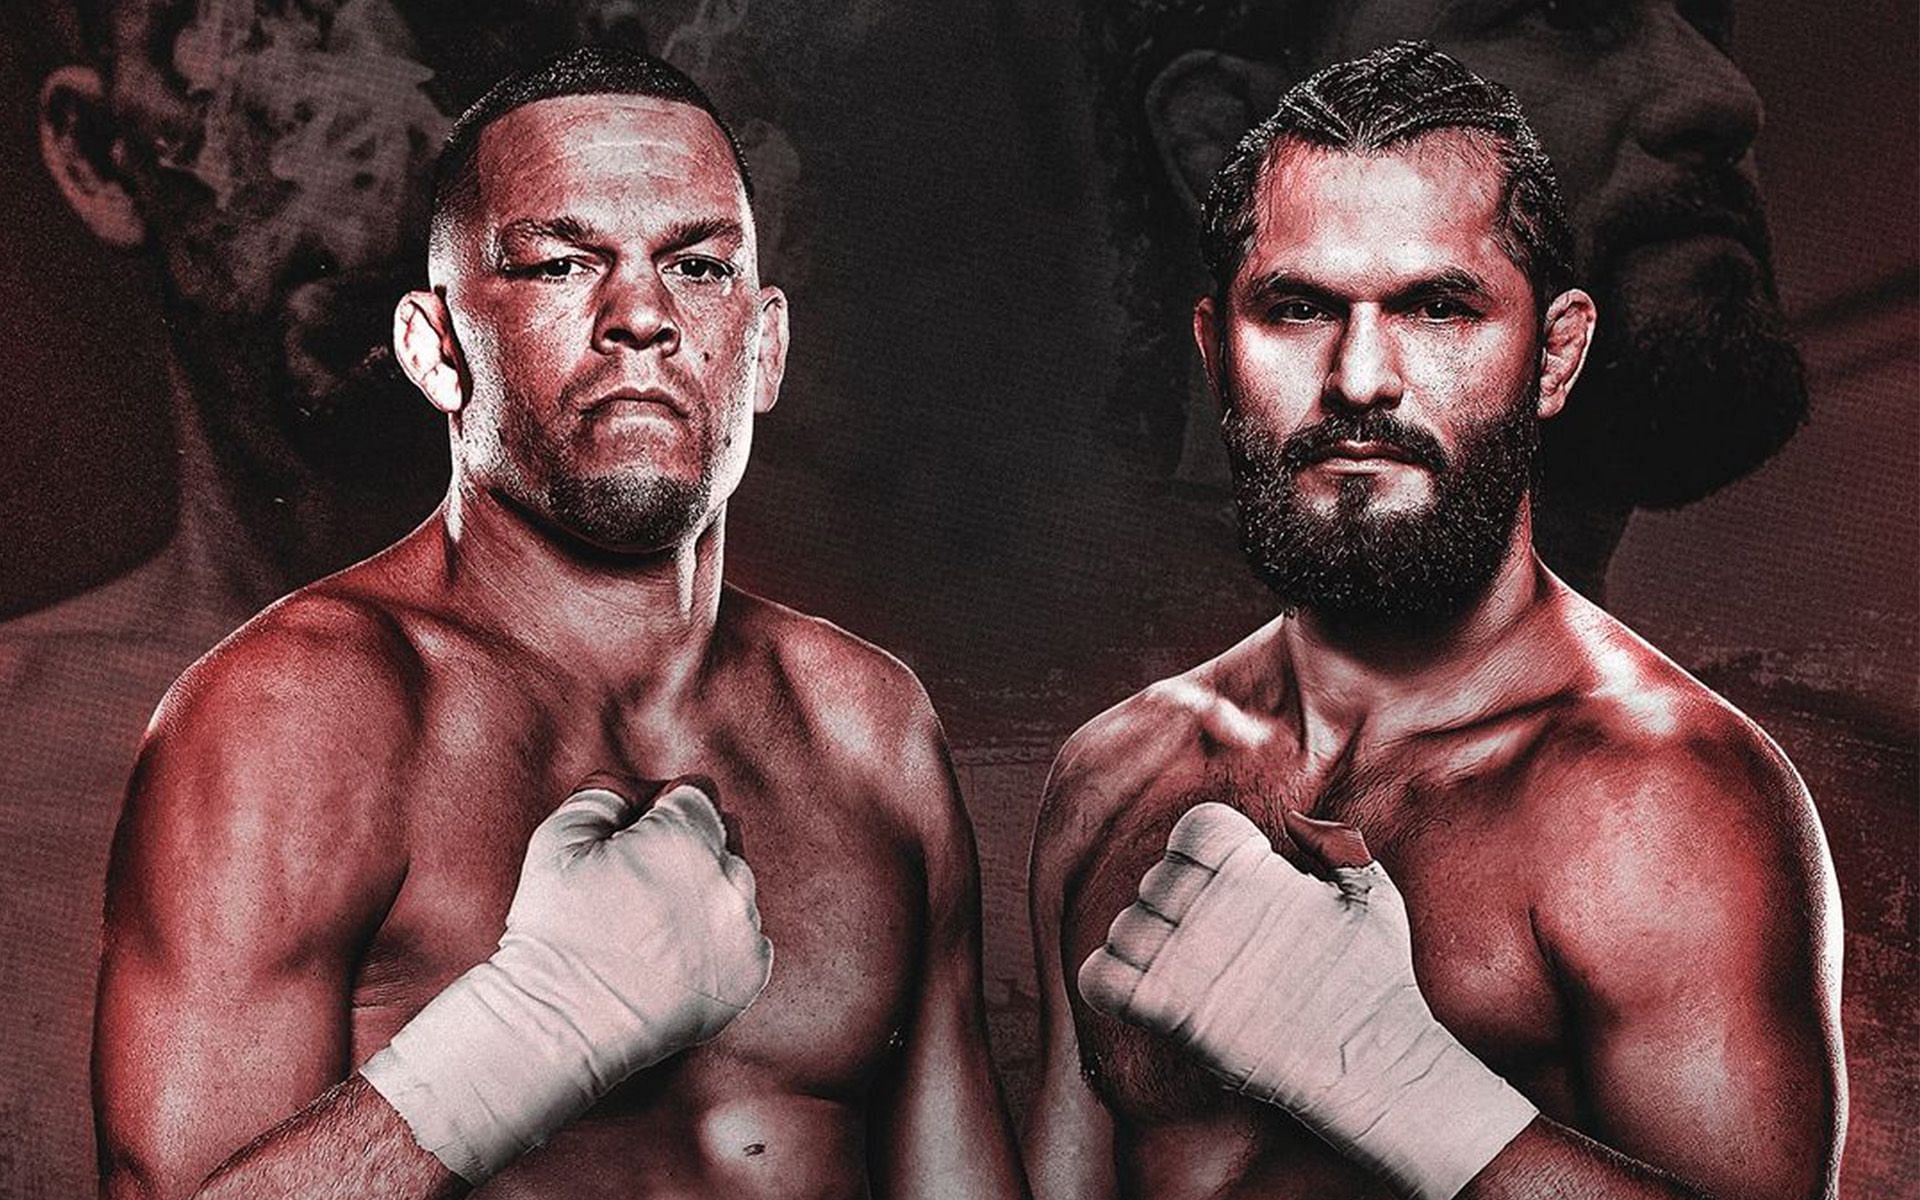 Nate Diaz (left) and Jorge Masvidal (right) will rematch in the boxing realm on July 6. [Image courtesy: @gamebredfighter on Instagram]